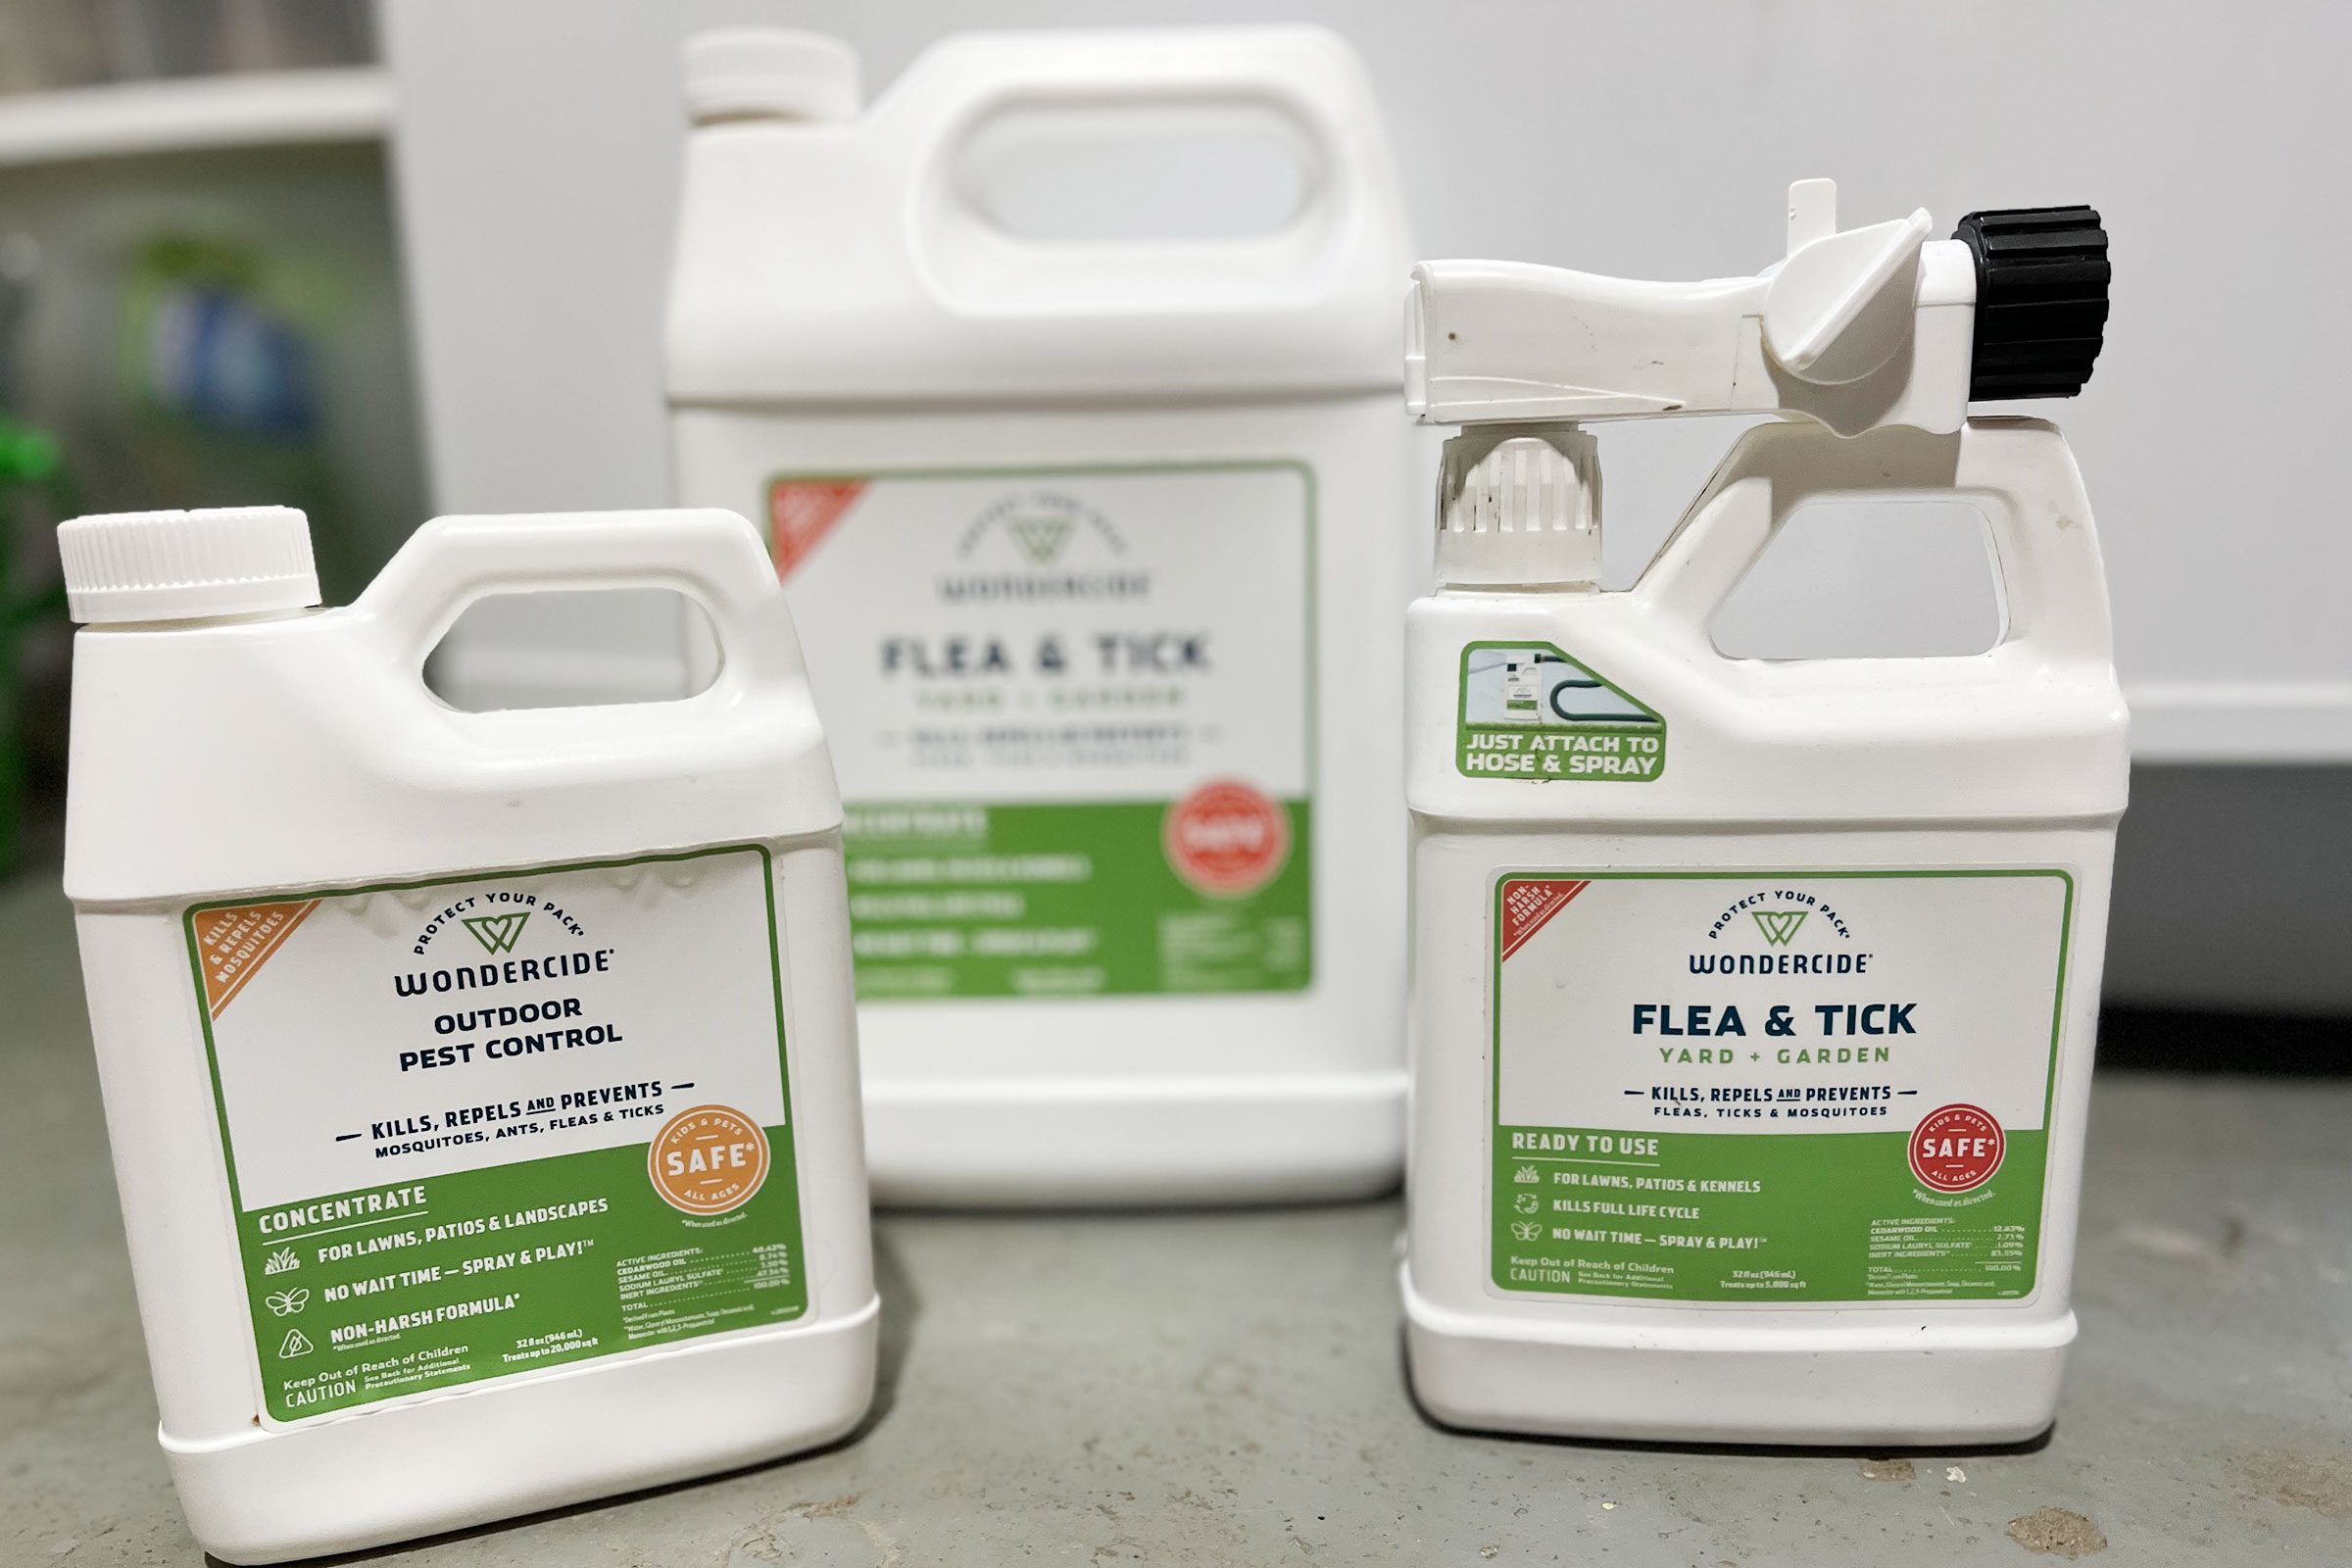 Wondercide Flea and Tick Review: Is it the Best Tick Spray for Your Yard?